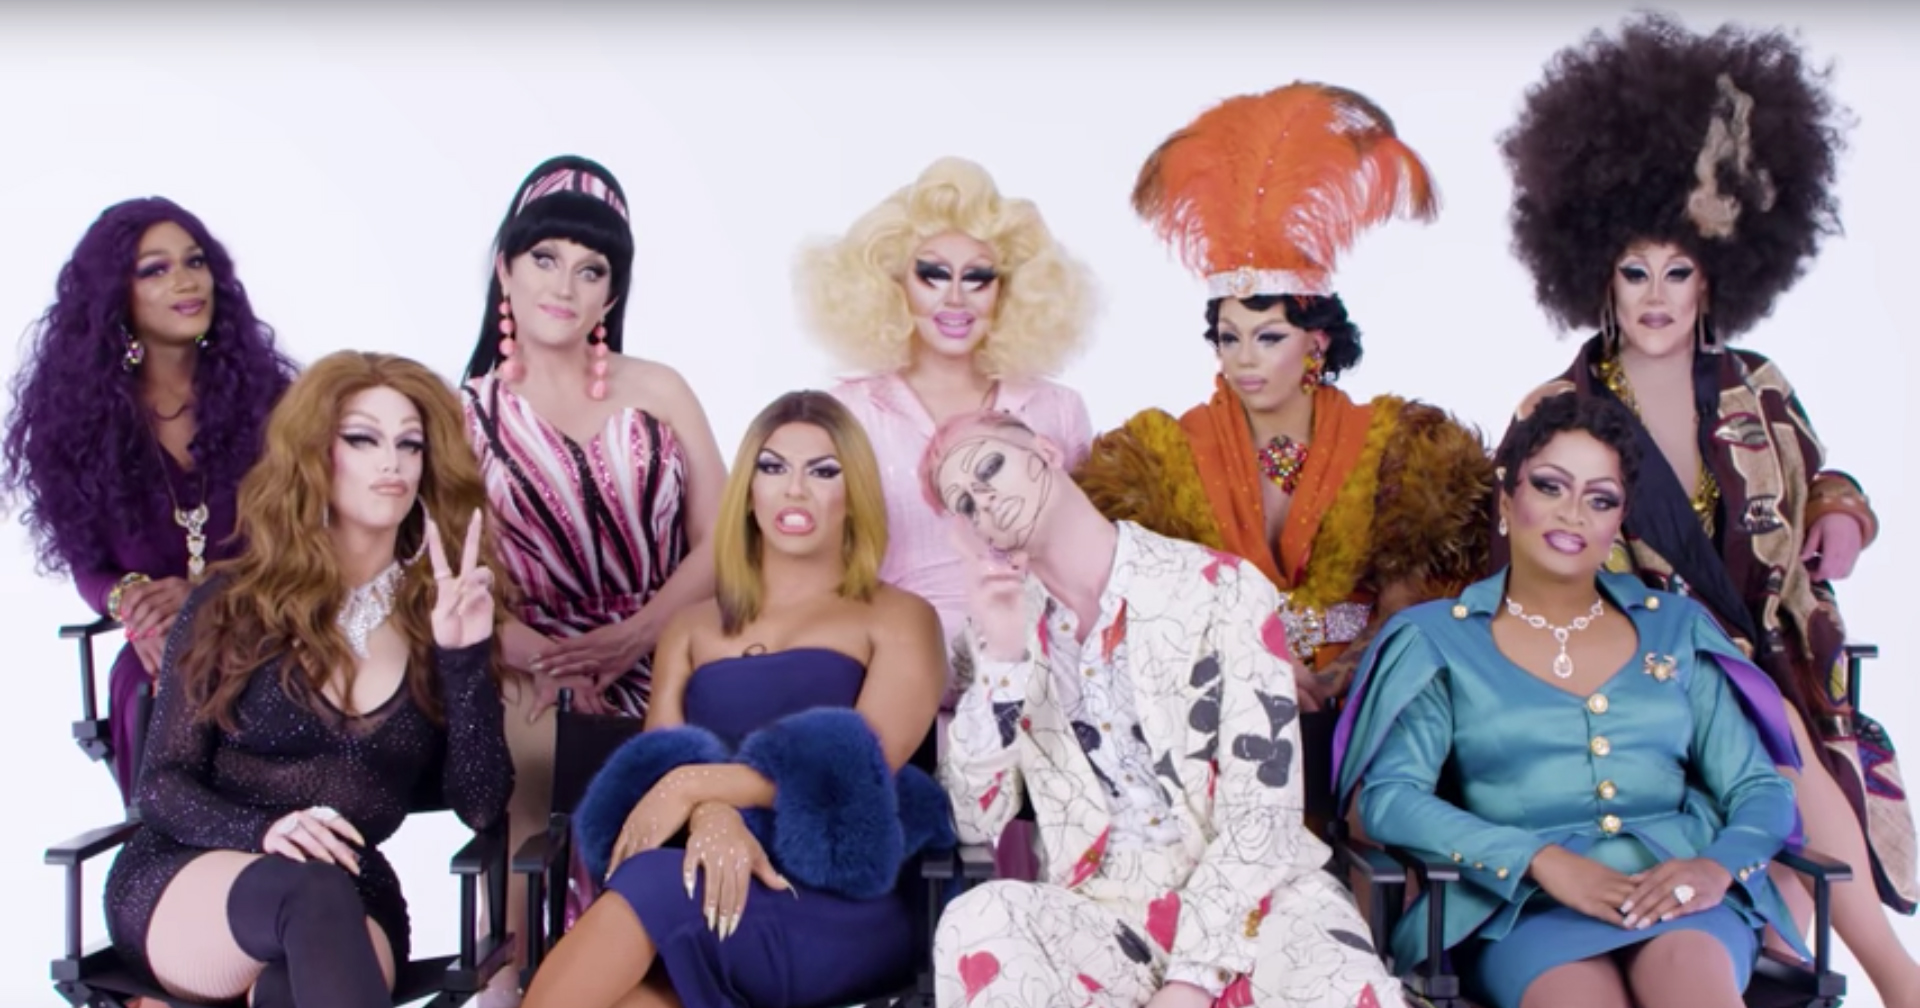 The cast of Drag Race All Stars 3 reacting to the previous season reading challenge